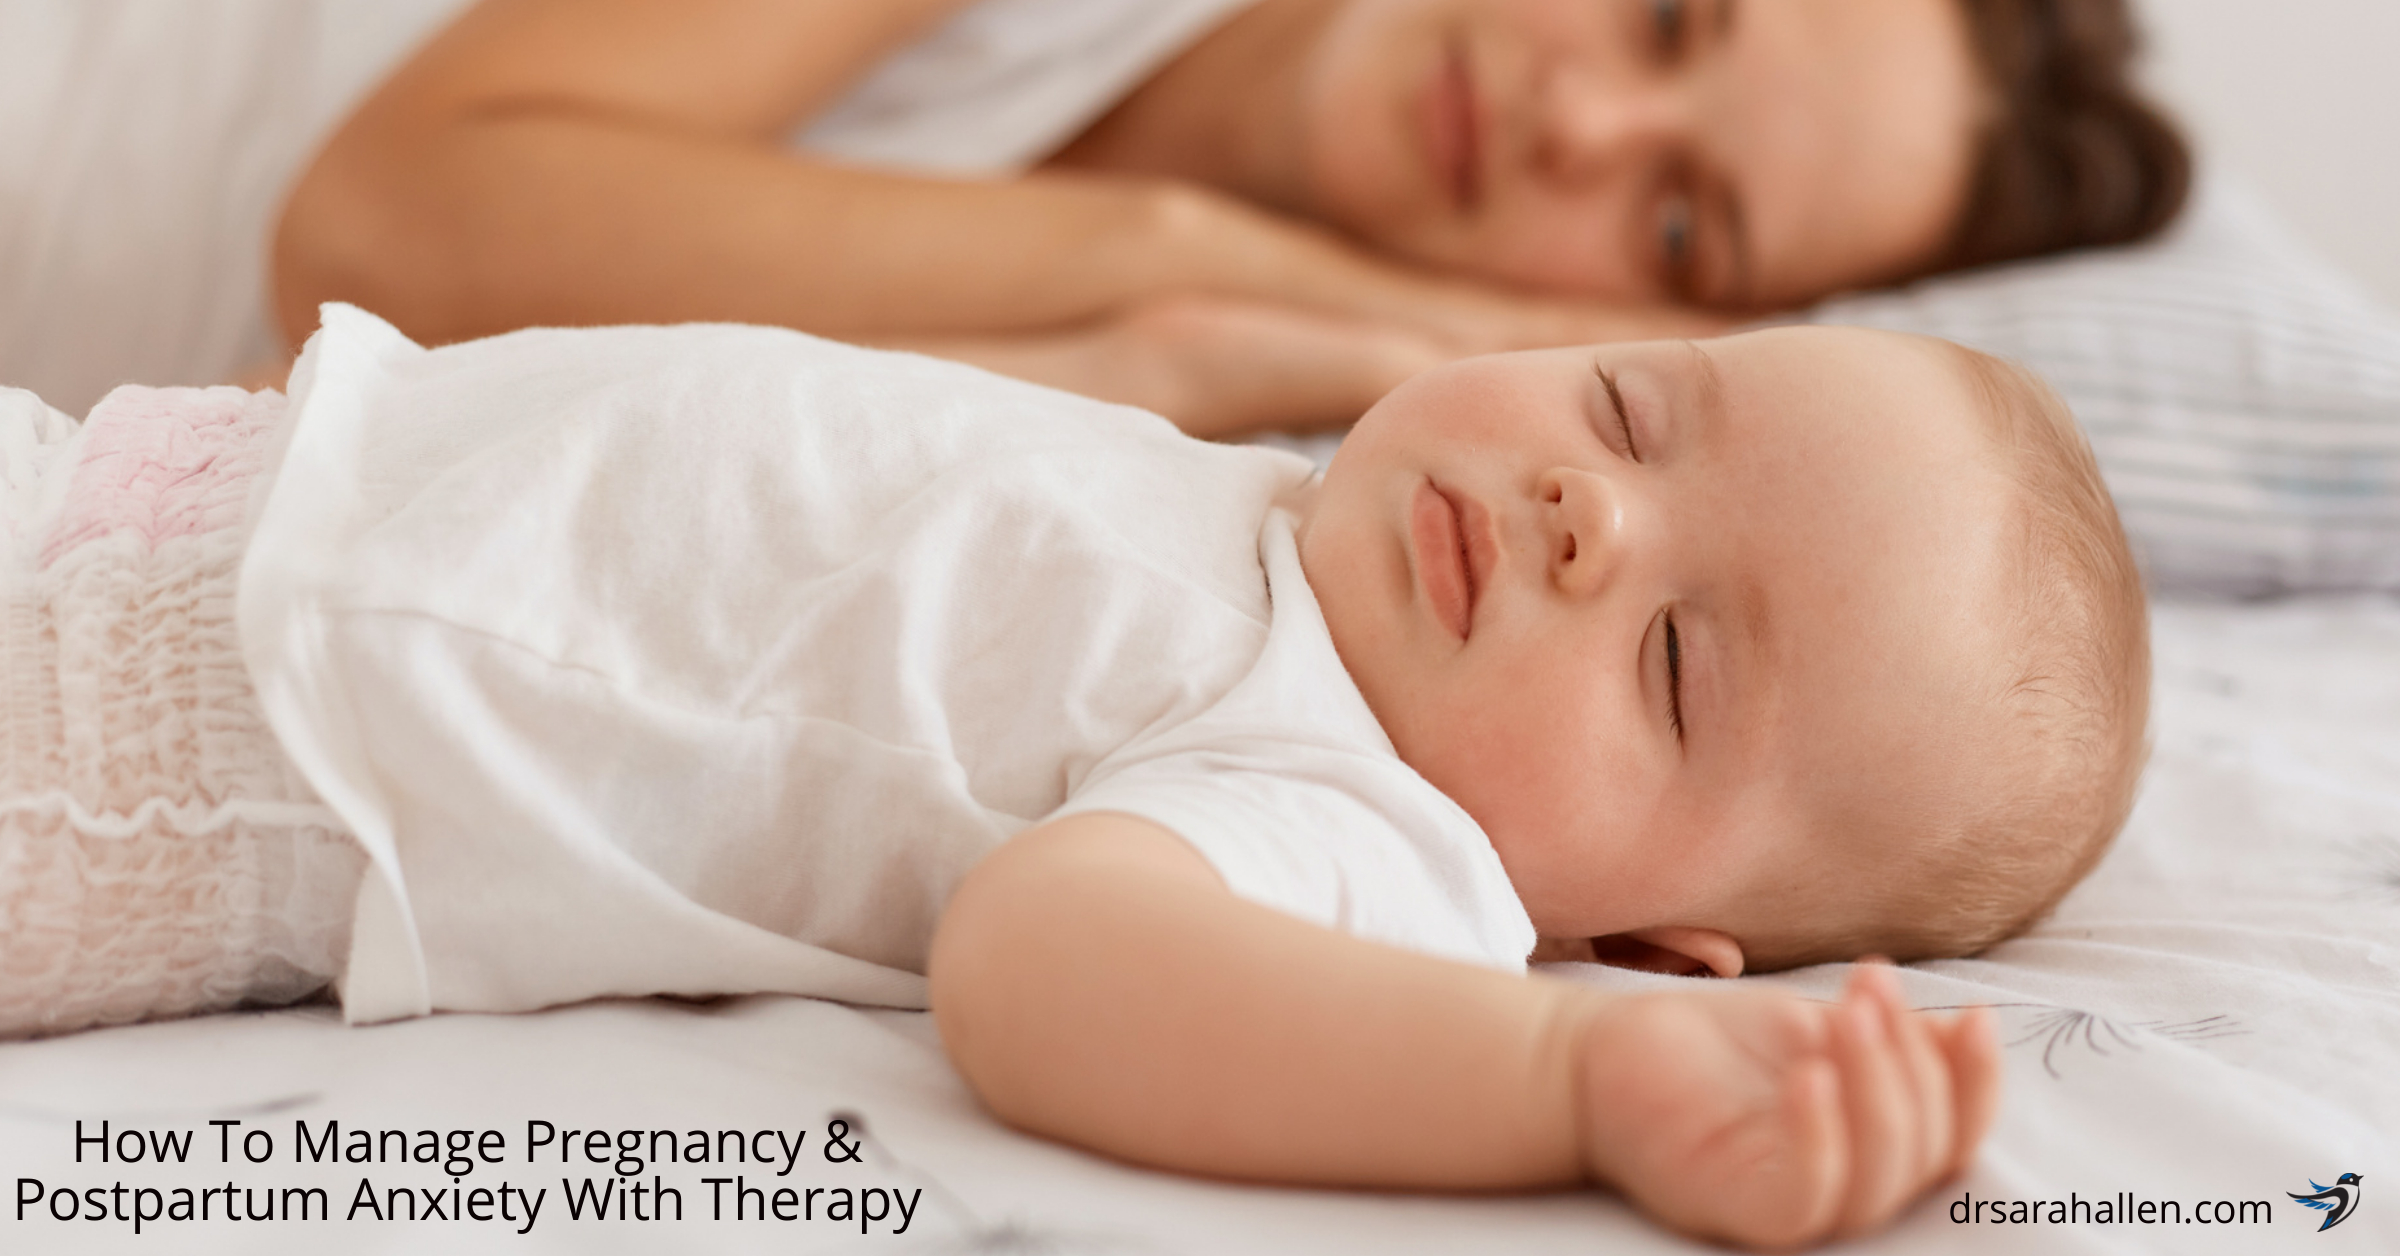 Manage Pregnancy & Postpartum Anxiety With Therapy